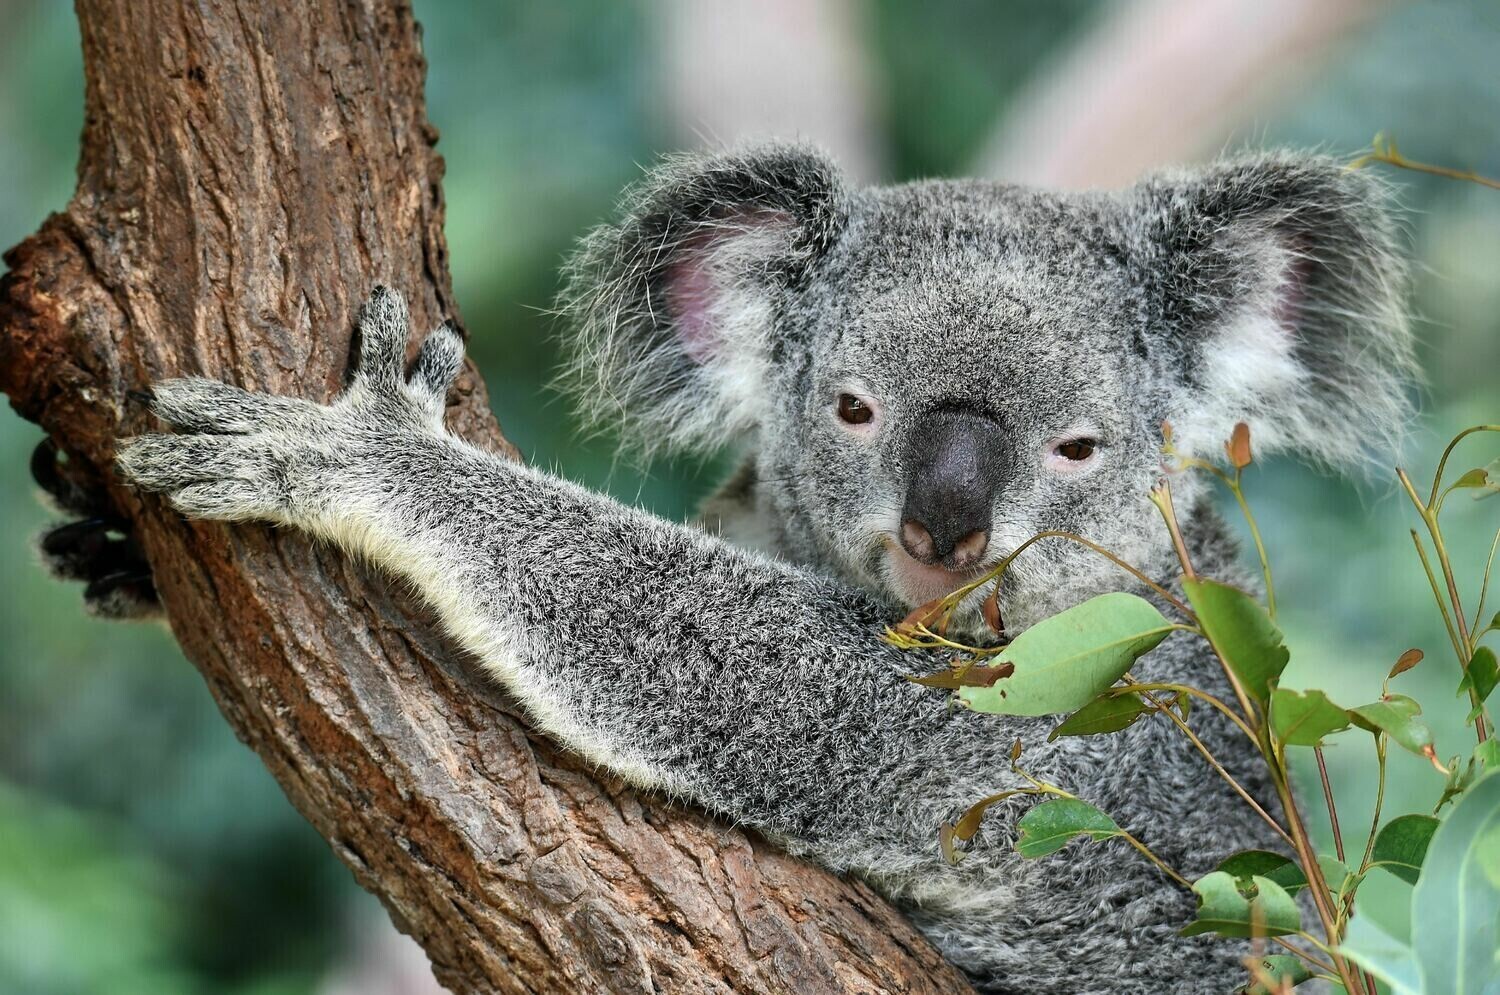 Koala 2 - Specially ordered for you. Delivery is approximately 4 - 6 weeks.